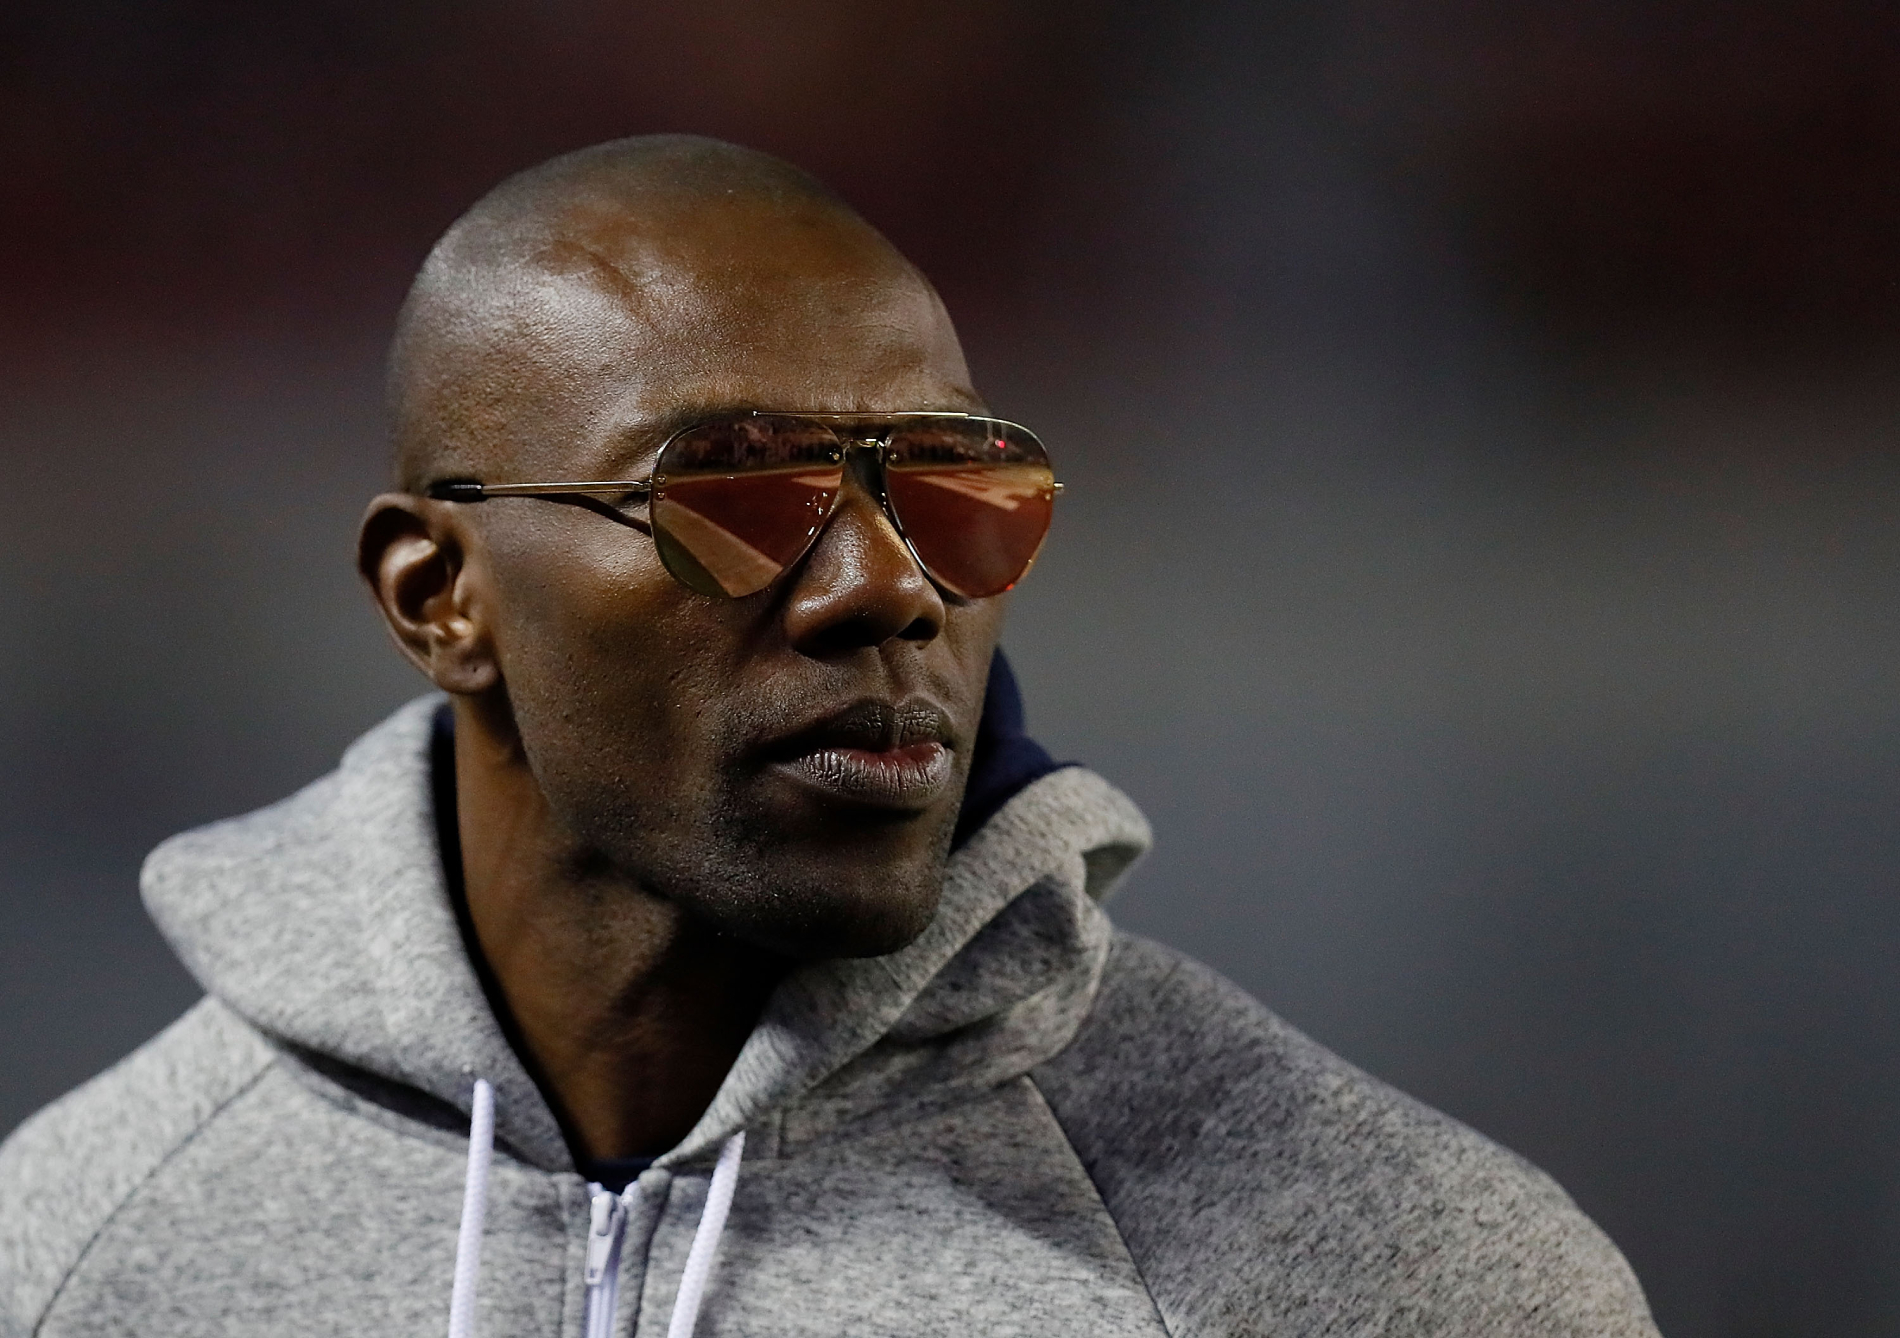 Baker Mayfield and Odell Beckham Jr. struggled in 2019. This has led to Terrell Owens recently challenging Mayfield to be better in 2020.